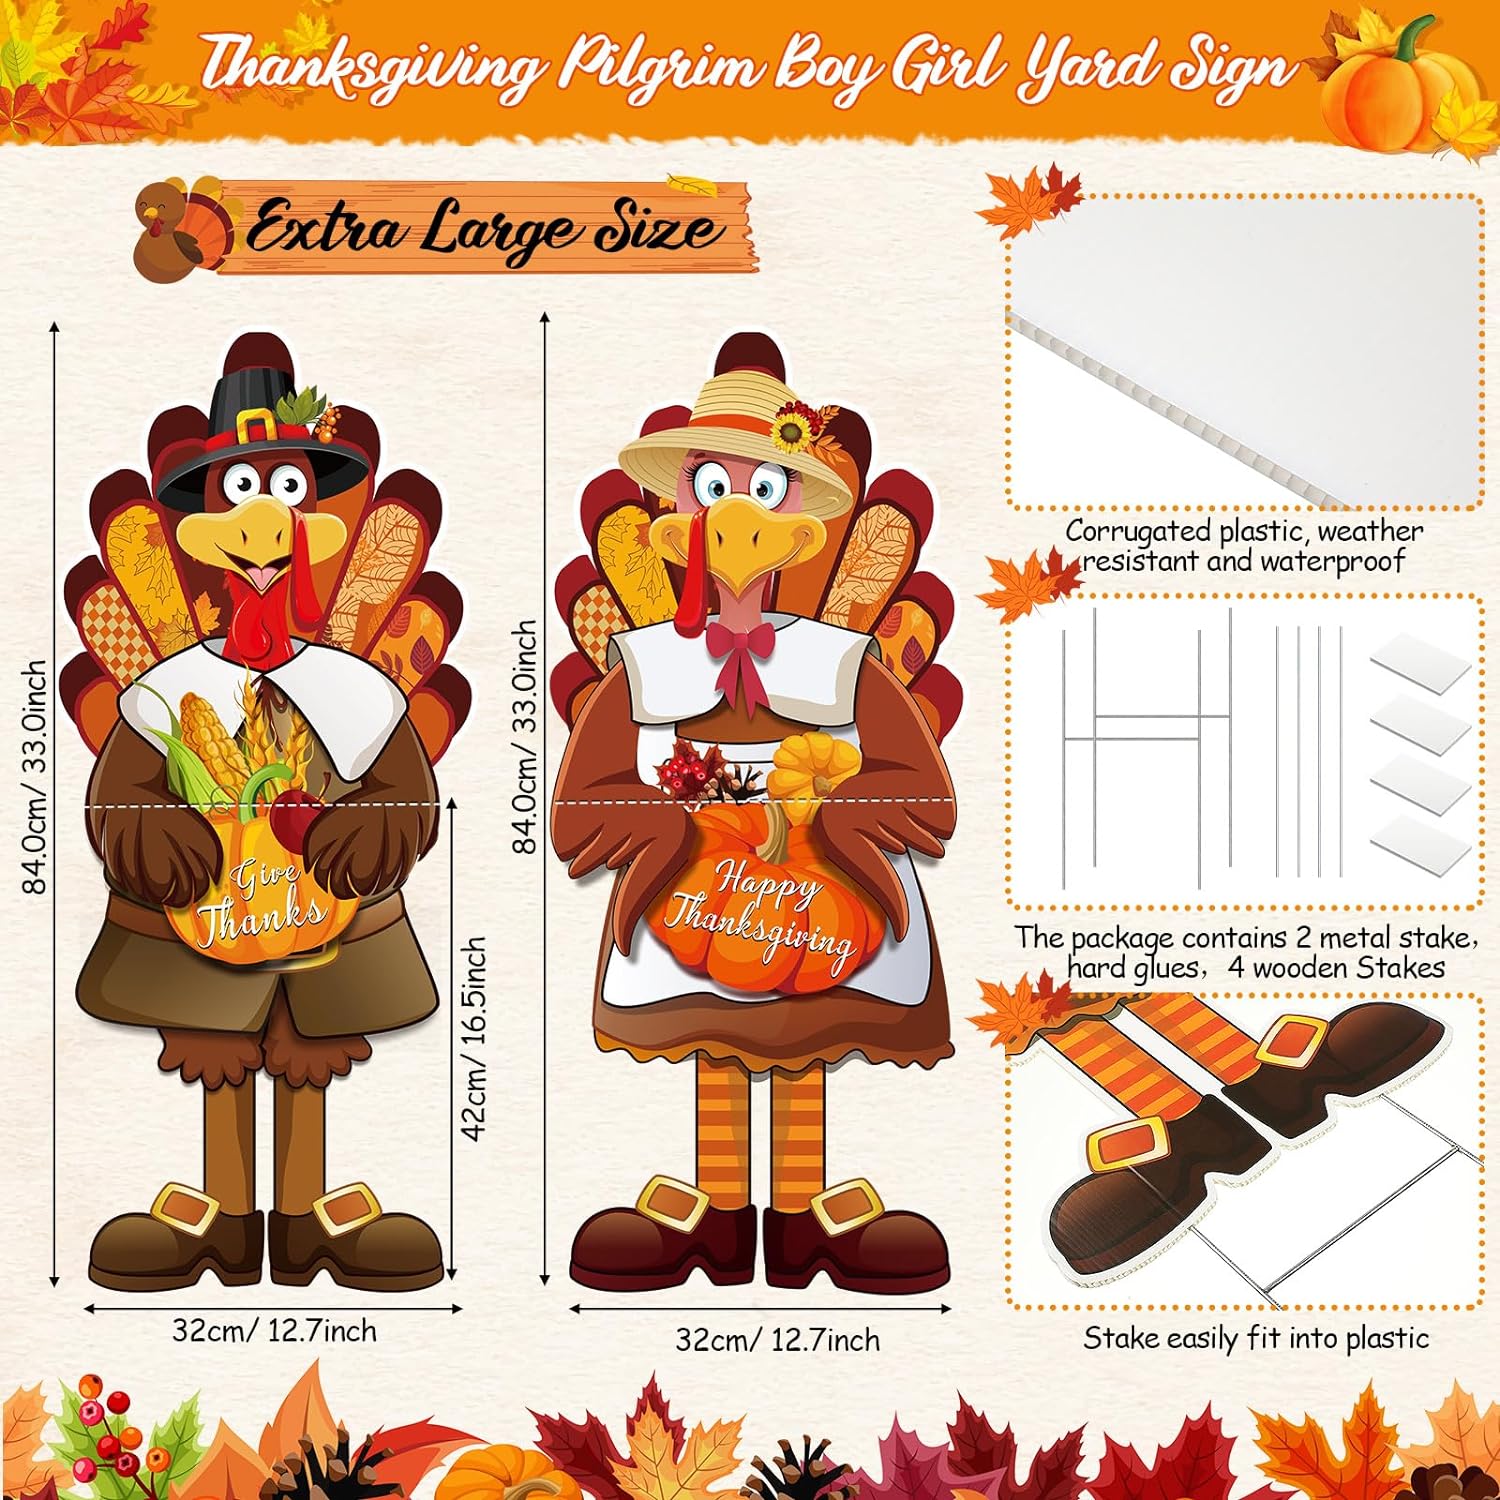 Capoda Large Thanksgiving Turkey Yard Sign, Turkey Pumpkin Yard Sign Stake Happy Thanksgiving Lawn Sign with H Stand for Autumn Thanksgiving Harvest Party Outdoor Supplies Decoration, 29.3 x 12.6 Inch